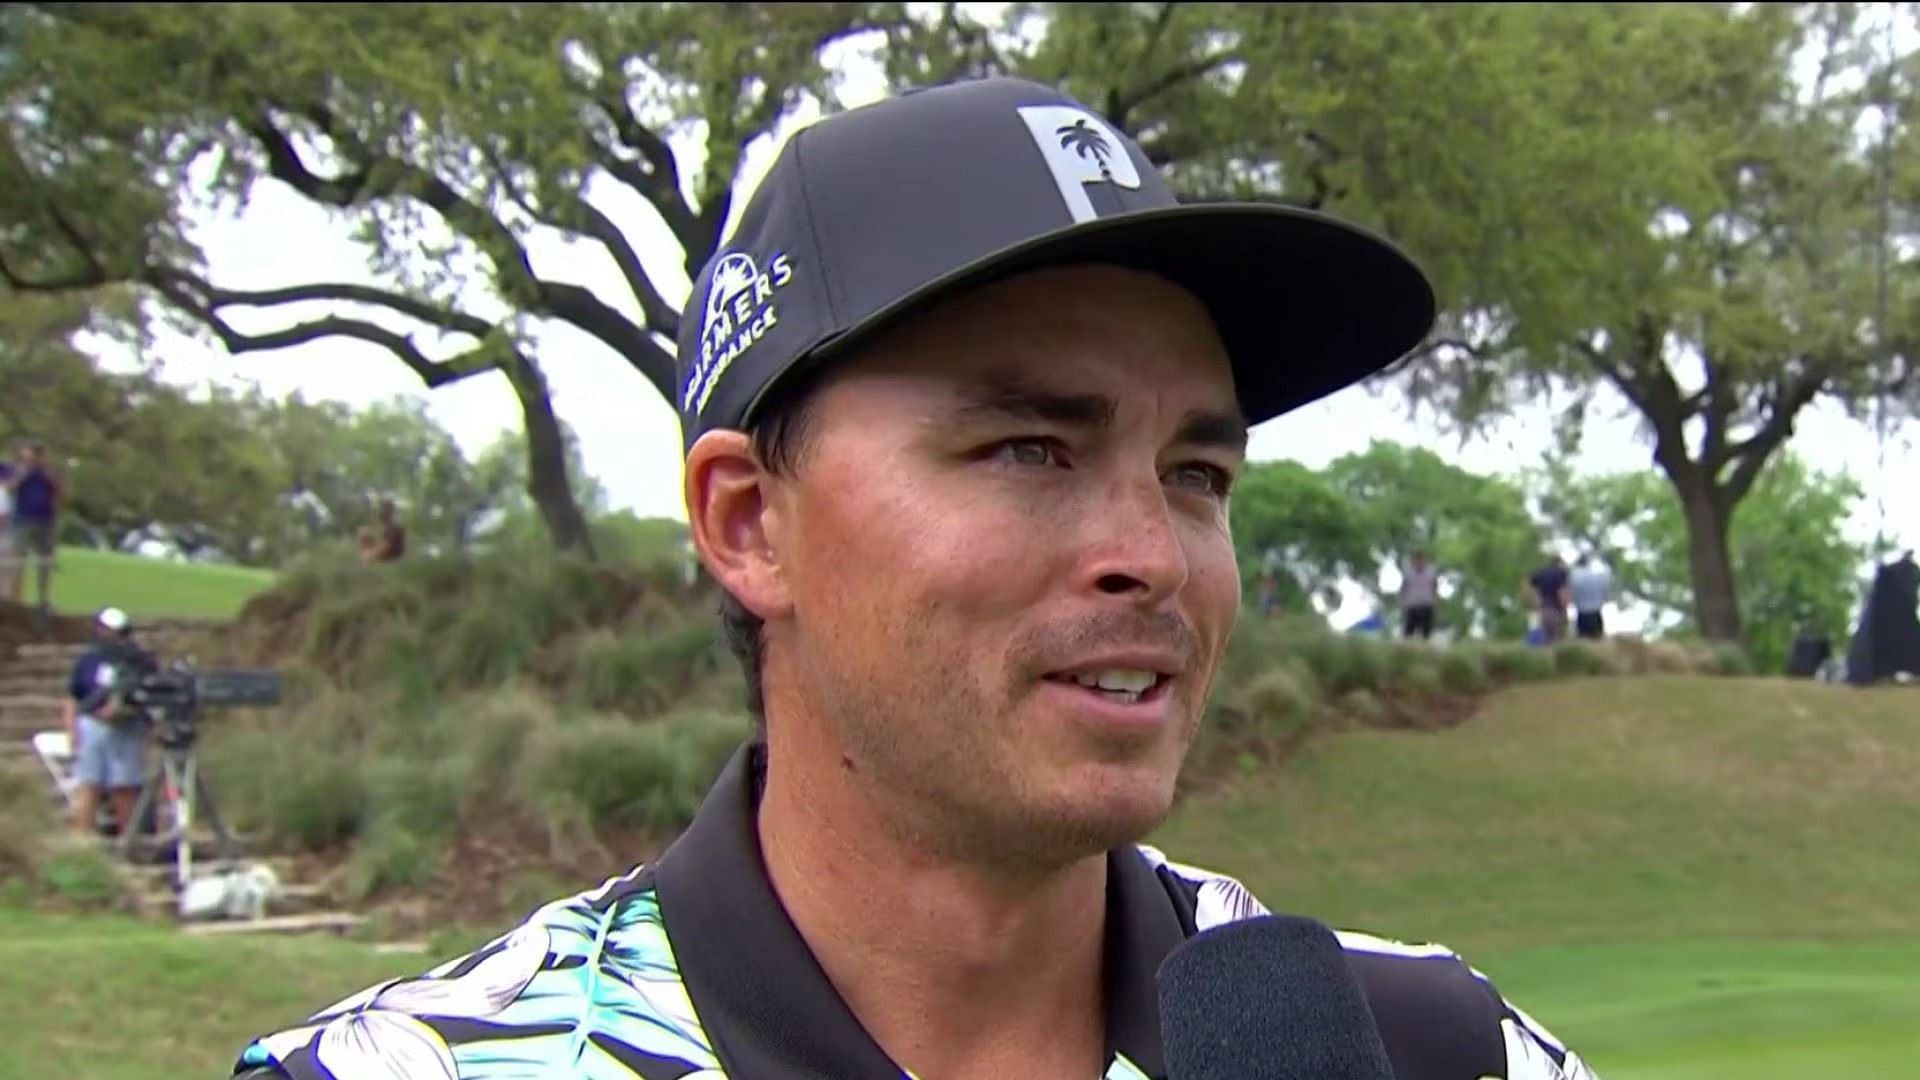 "So Rickie to the Masters?" Fans react to Rickie Fowler's win over